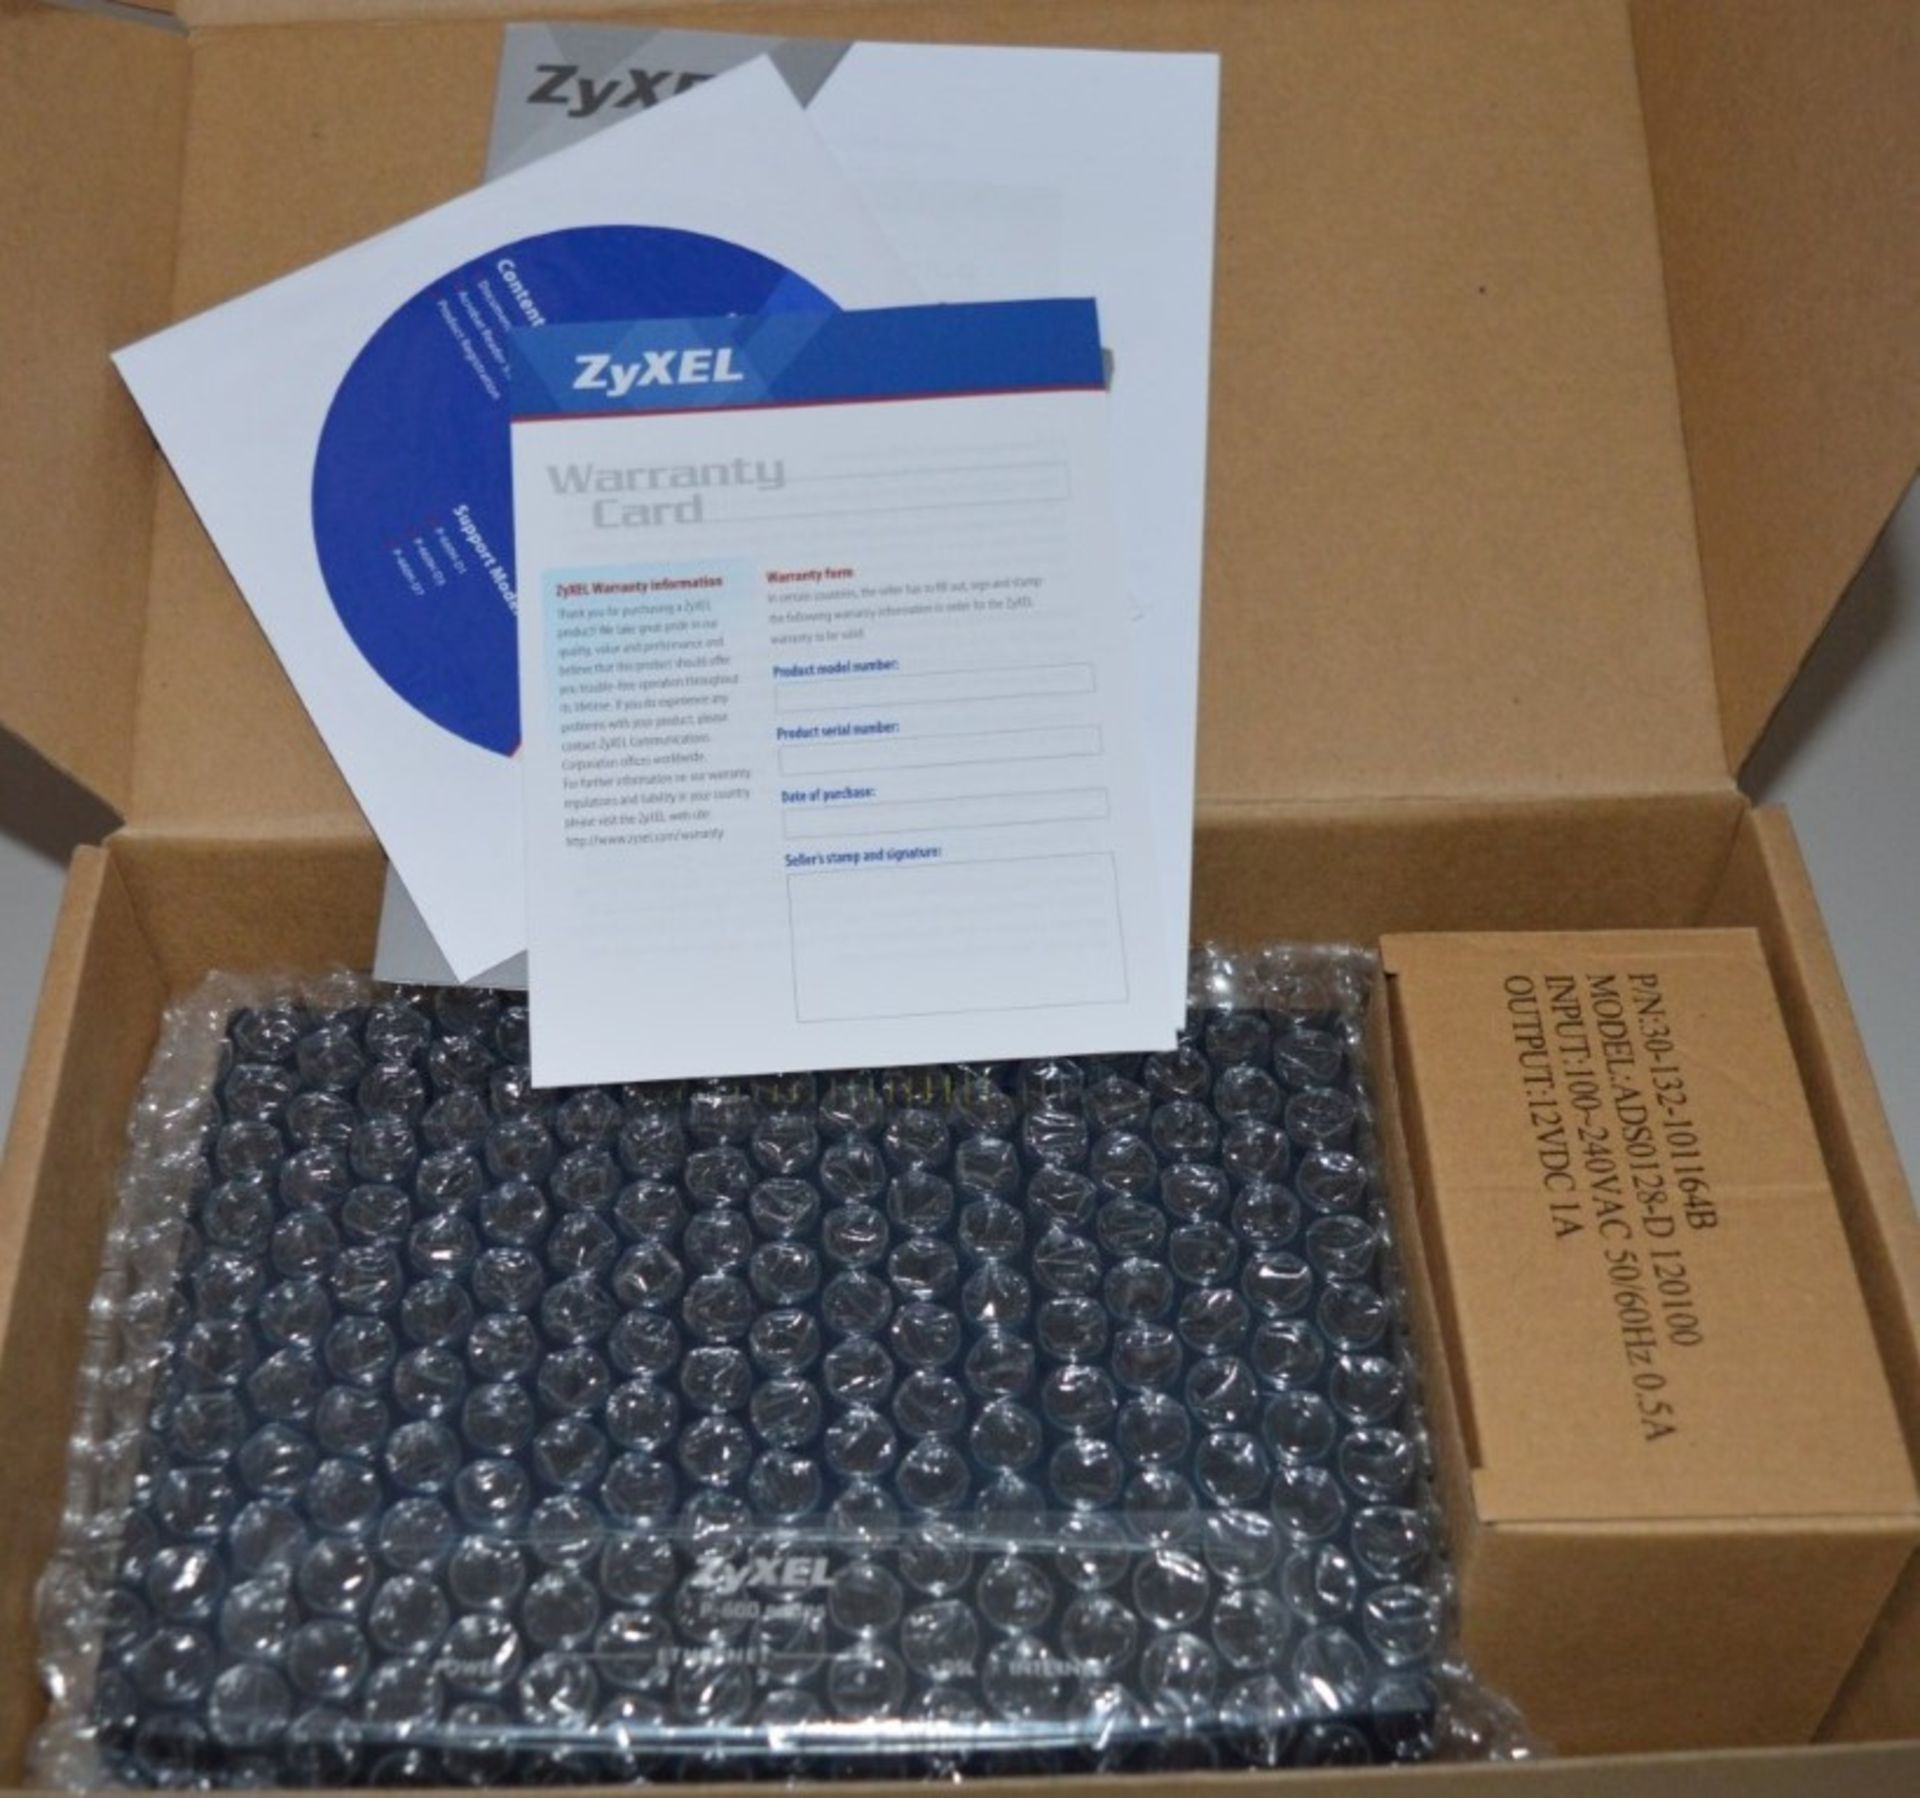 1 x Zyxel Ultra High Speed ASL2+ Gateway For SOHO Networks Router - Model P-660H - New and - Image 3 of 3